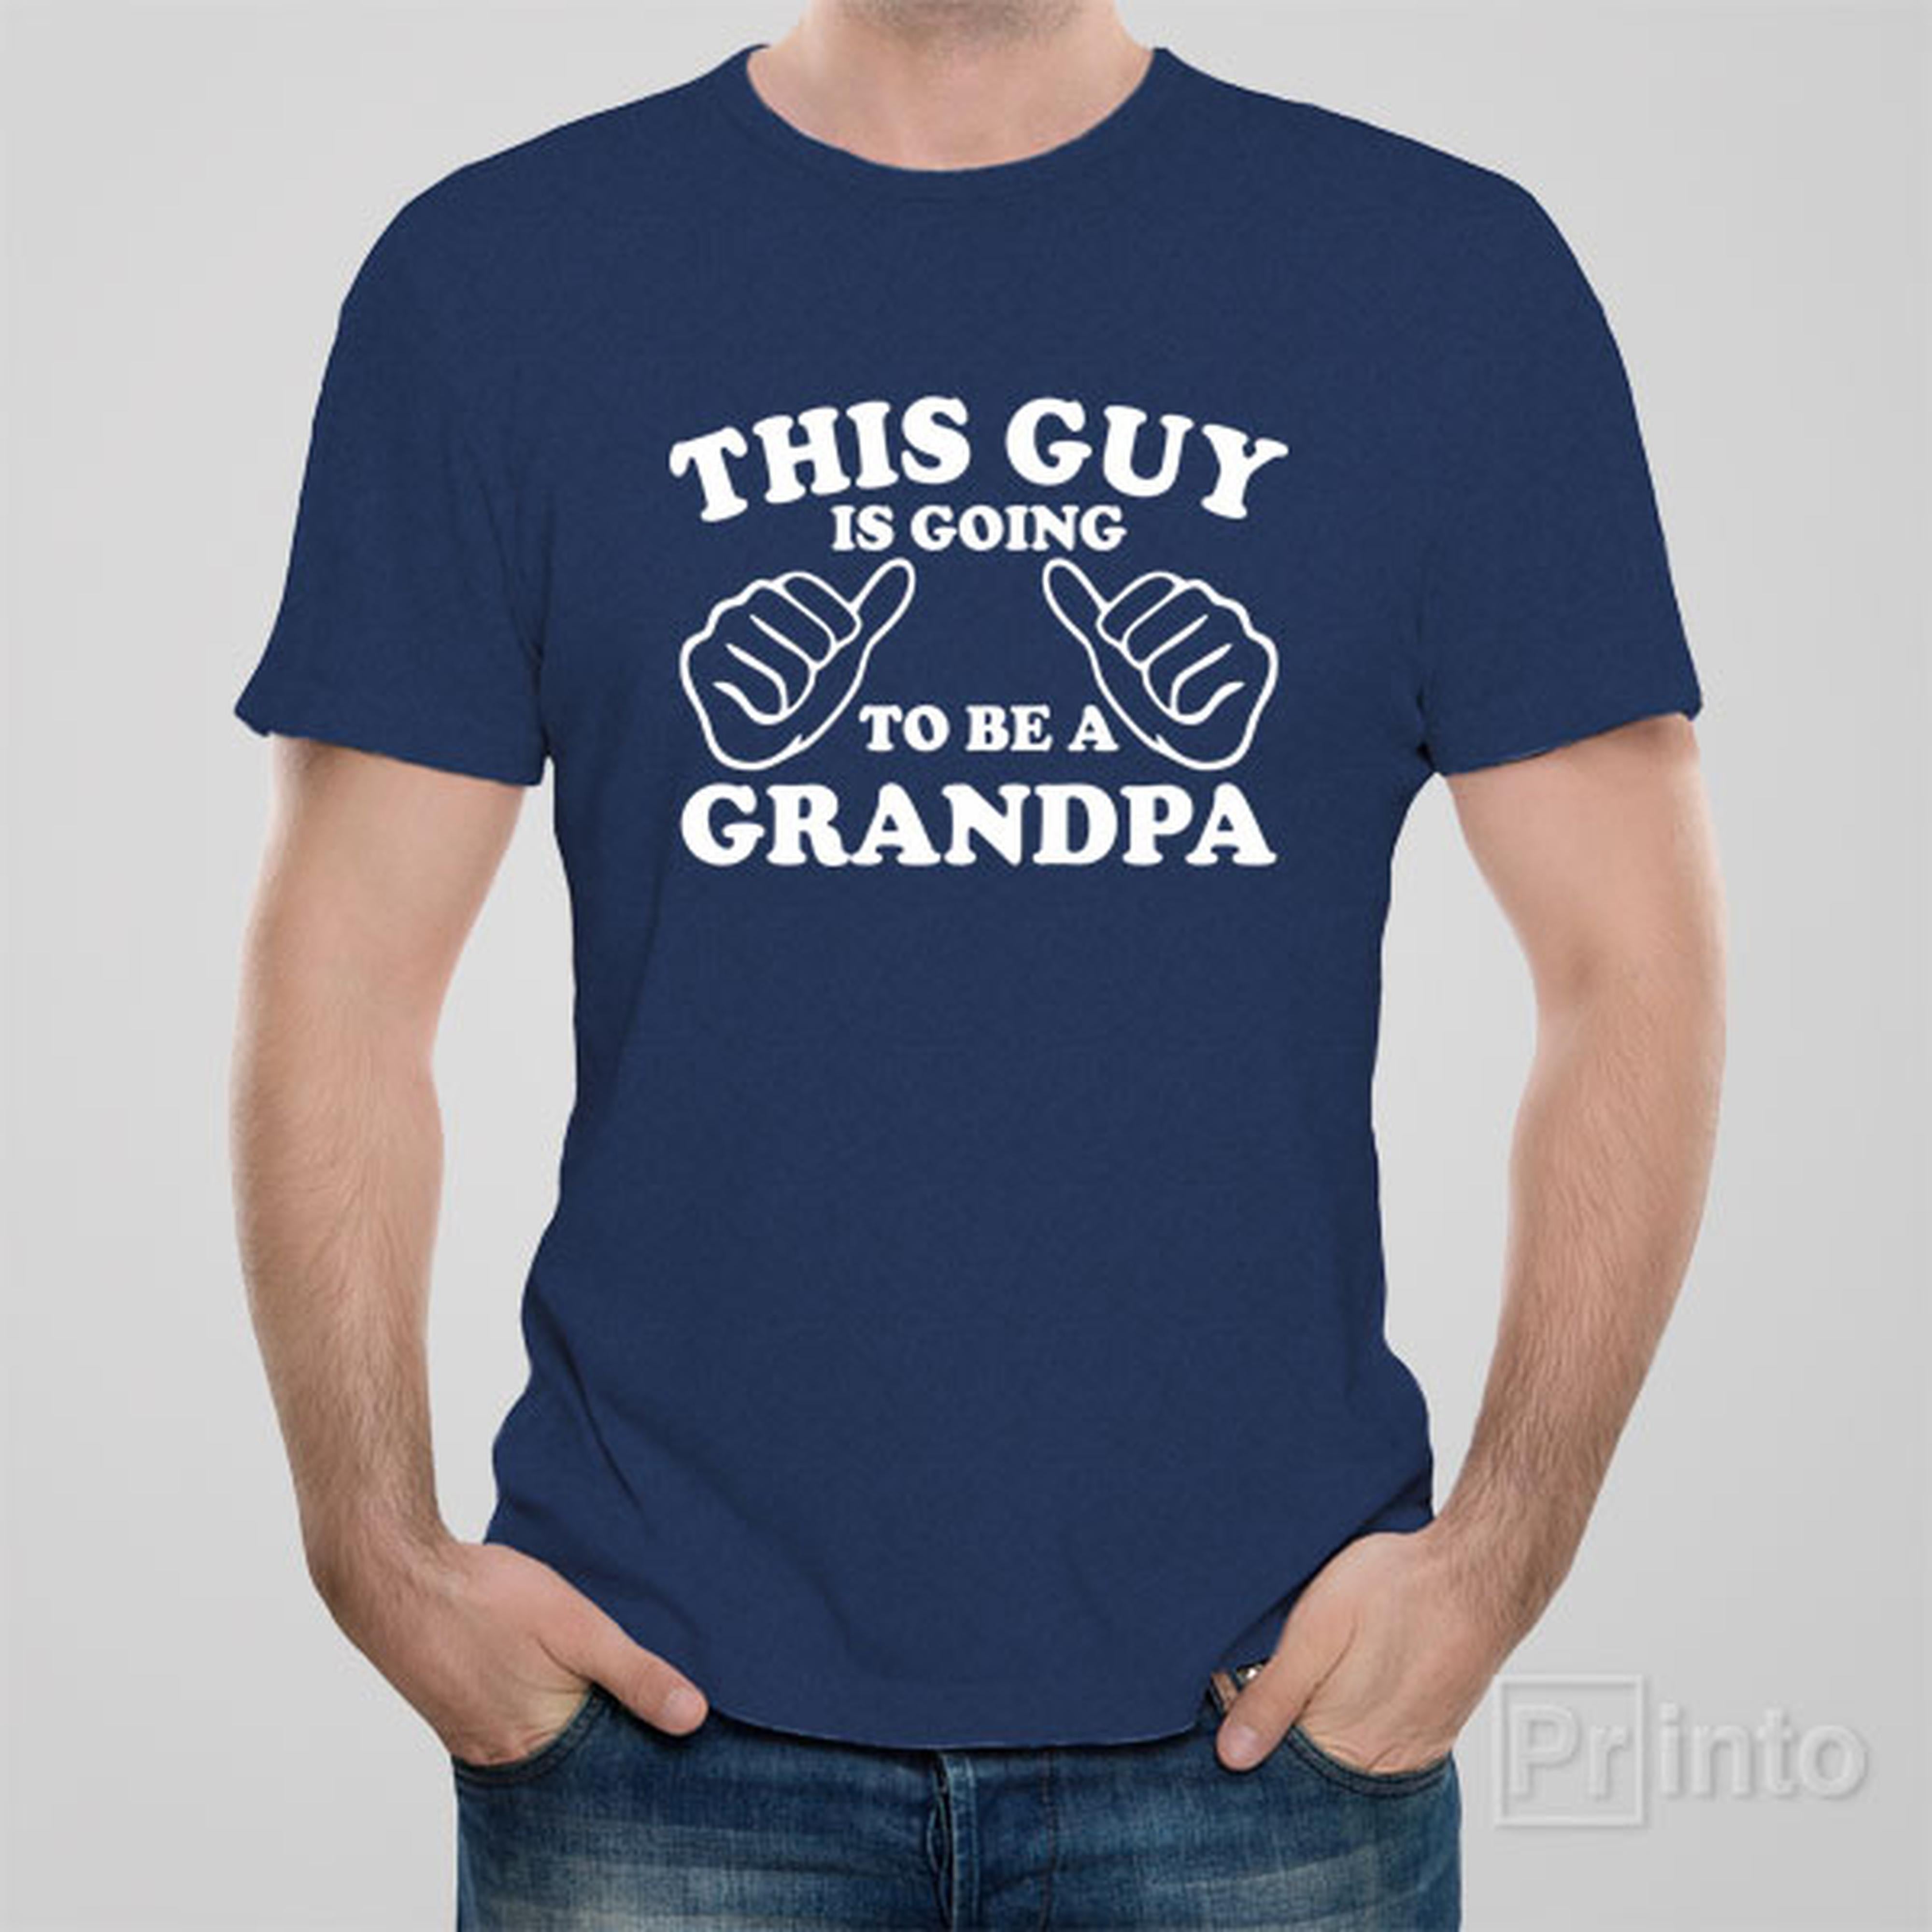 this-guy-is-going-to-be-a-grandpa-t-shirt